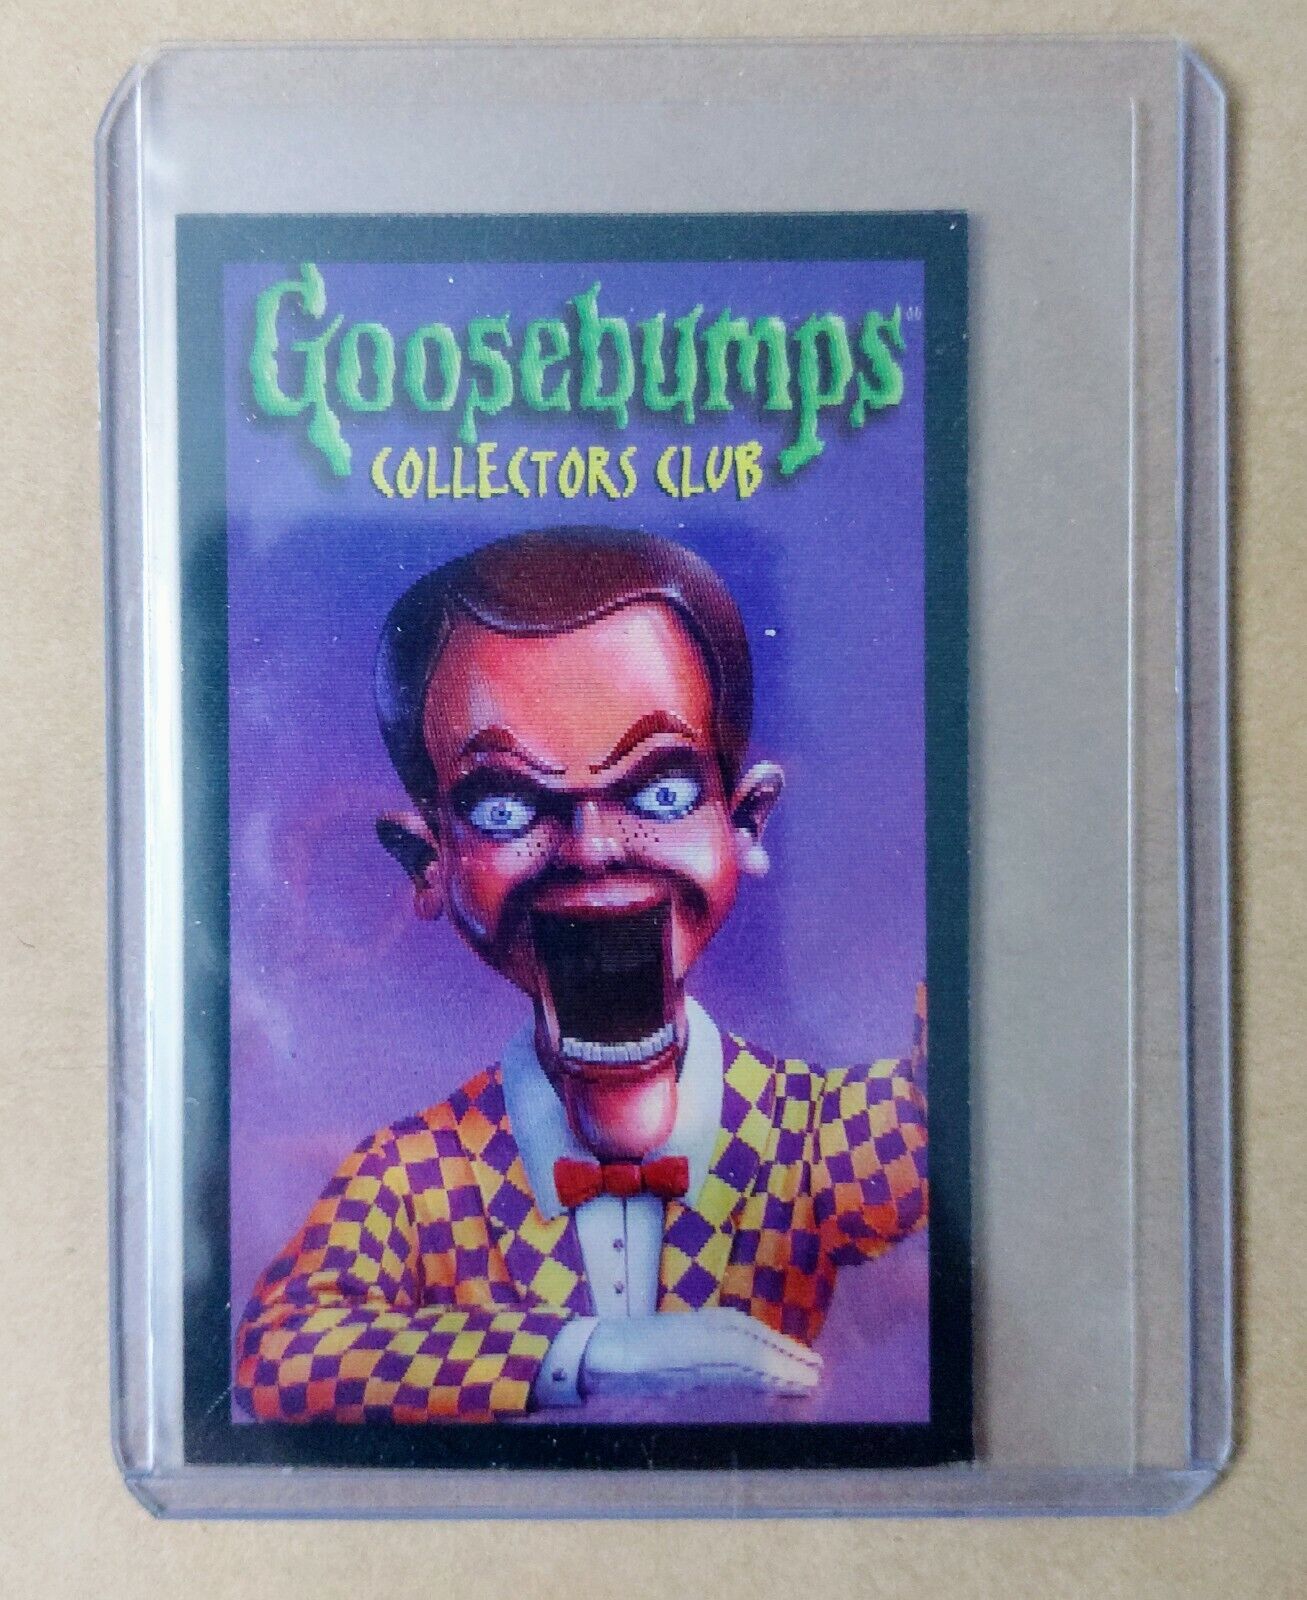 RARE 1997 Goosebumps Collectors Club Lenticular Card - Slappy / Curly NOT SIGNED